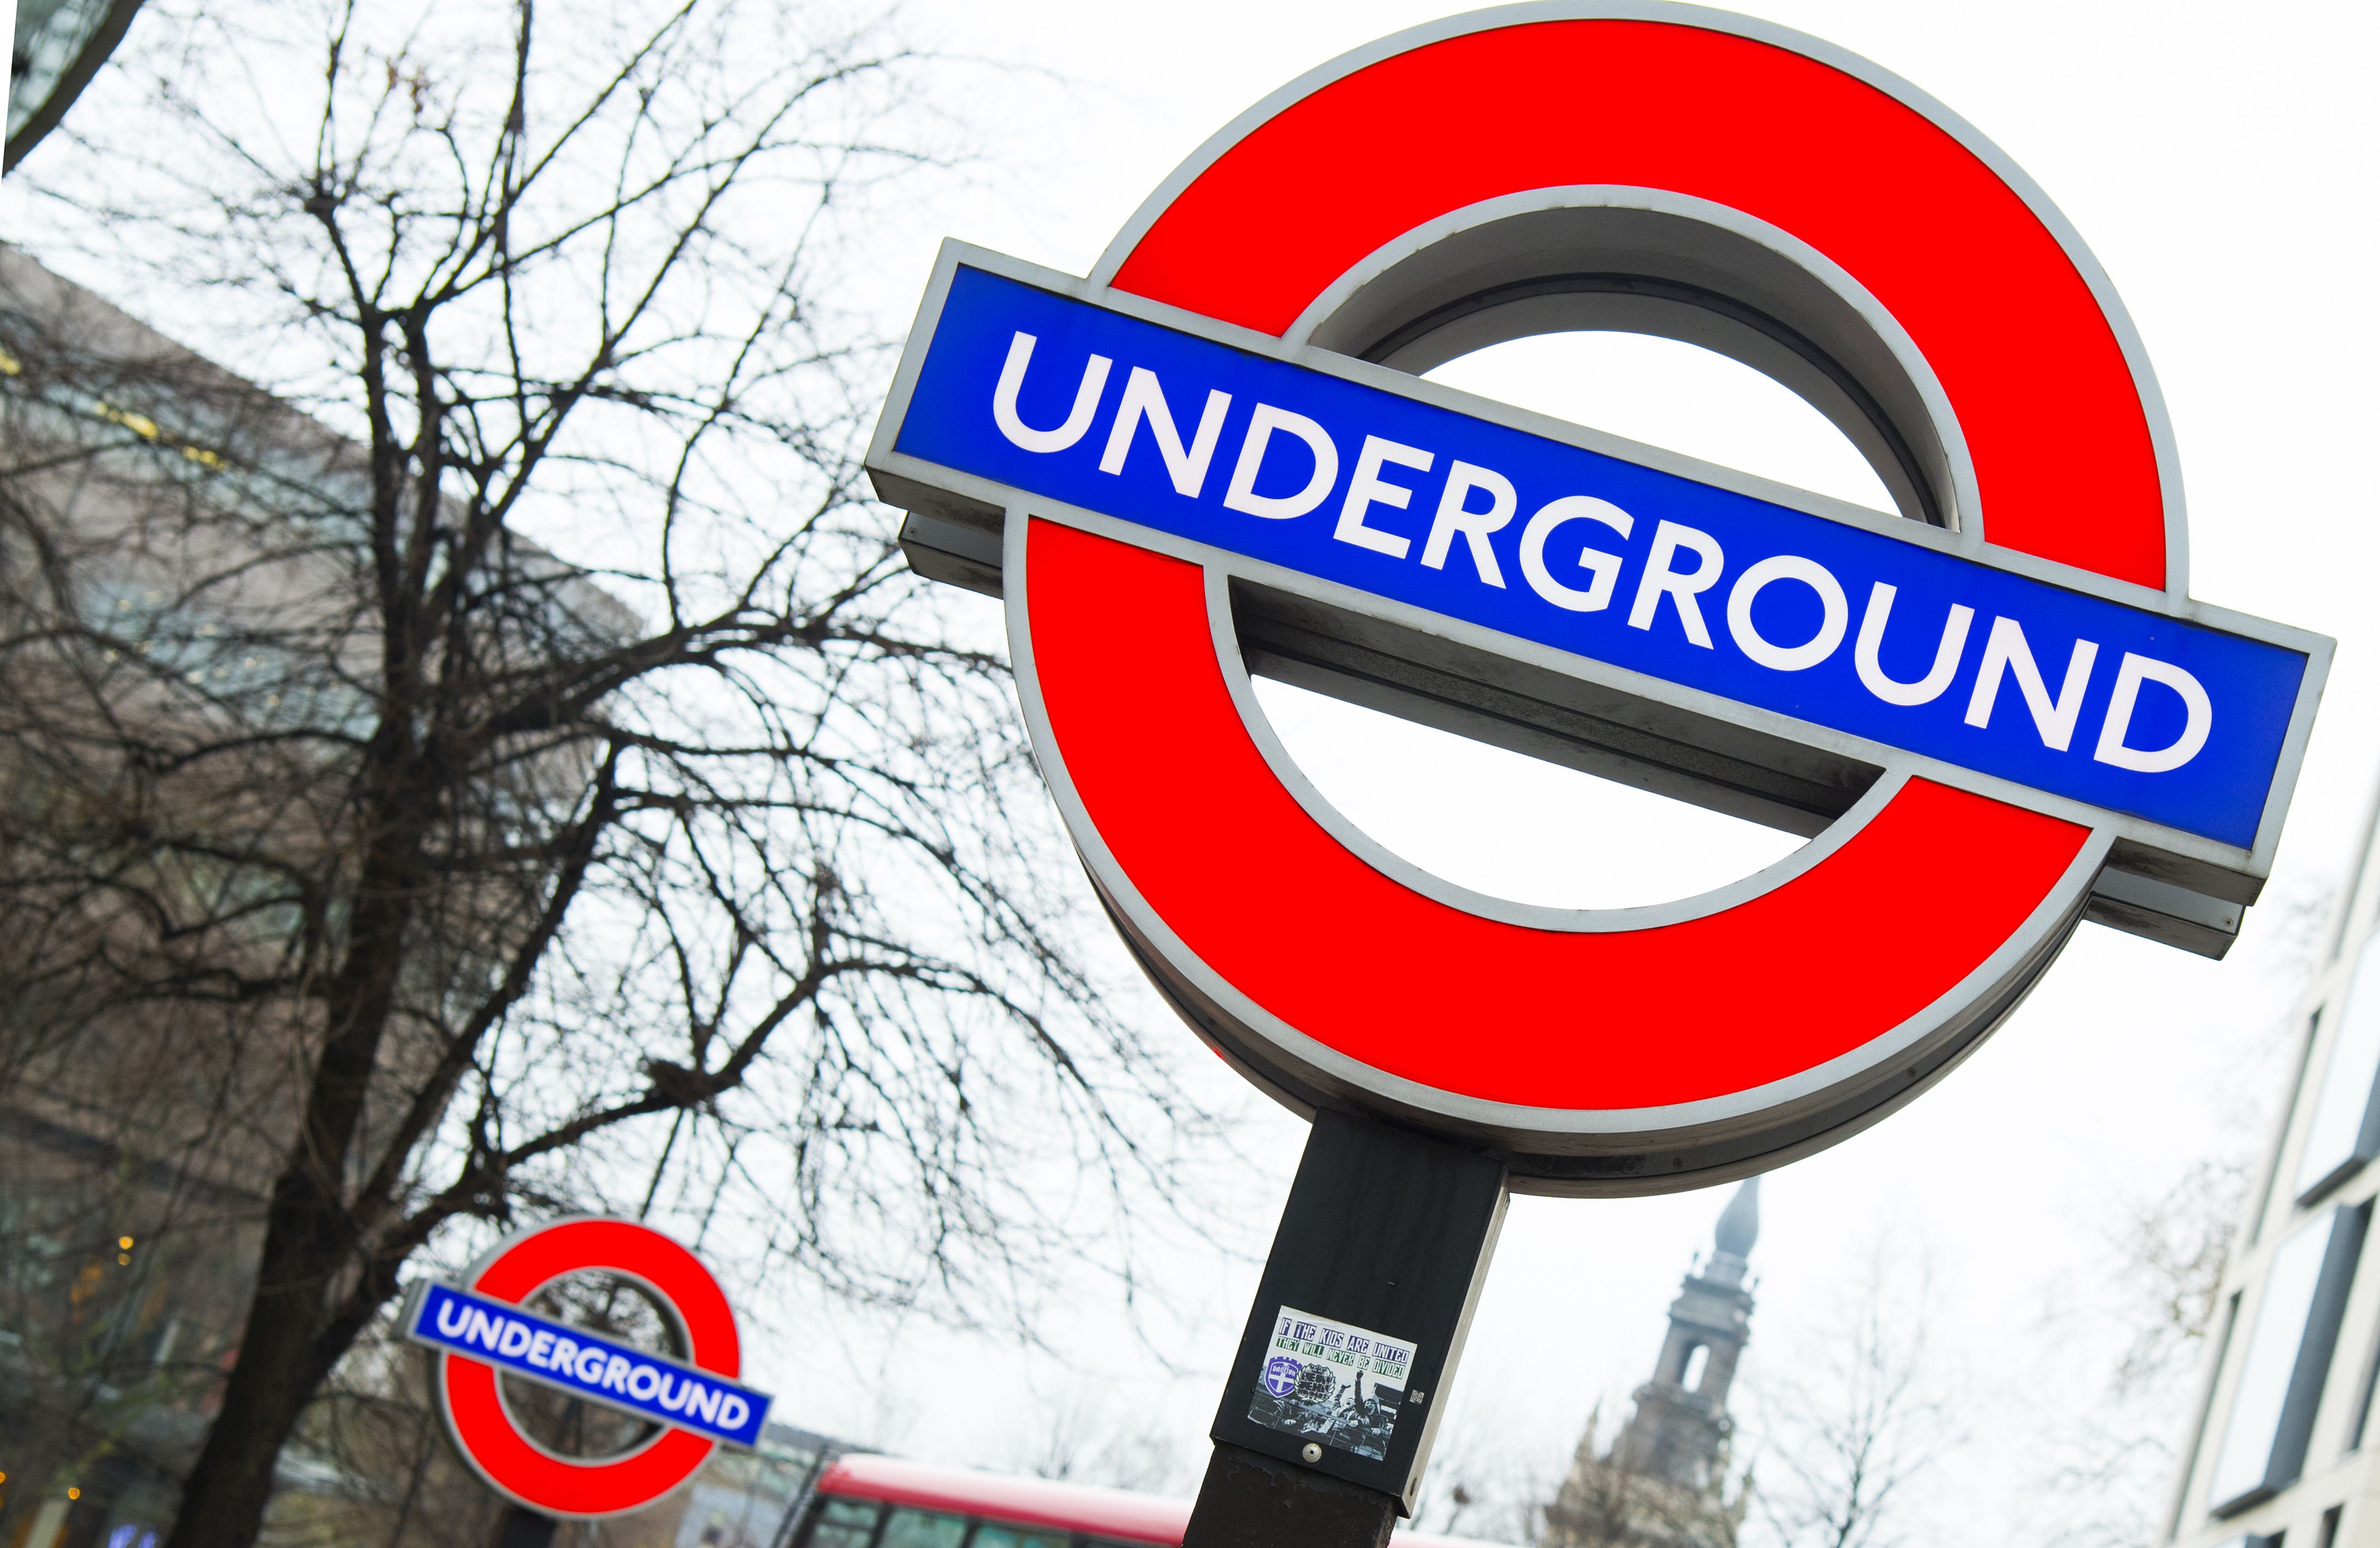 The Tube strike could spark travel chaos in the capital